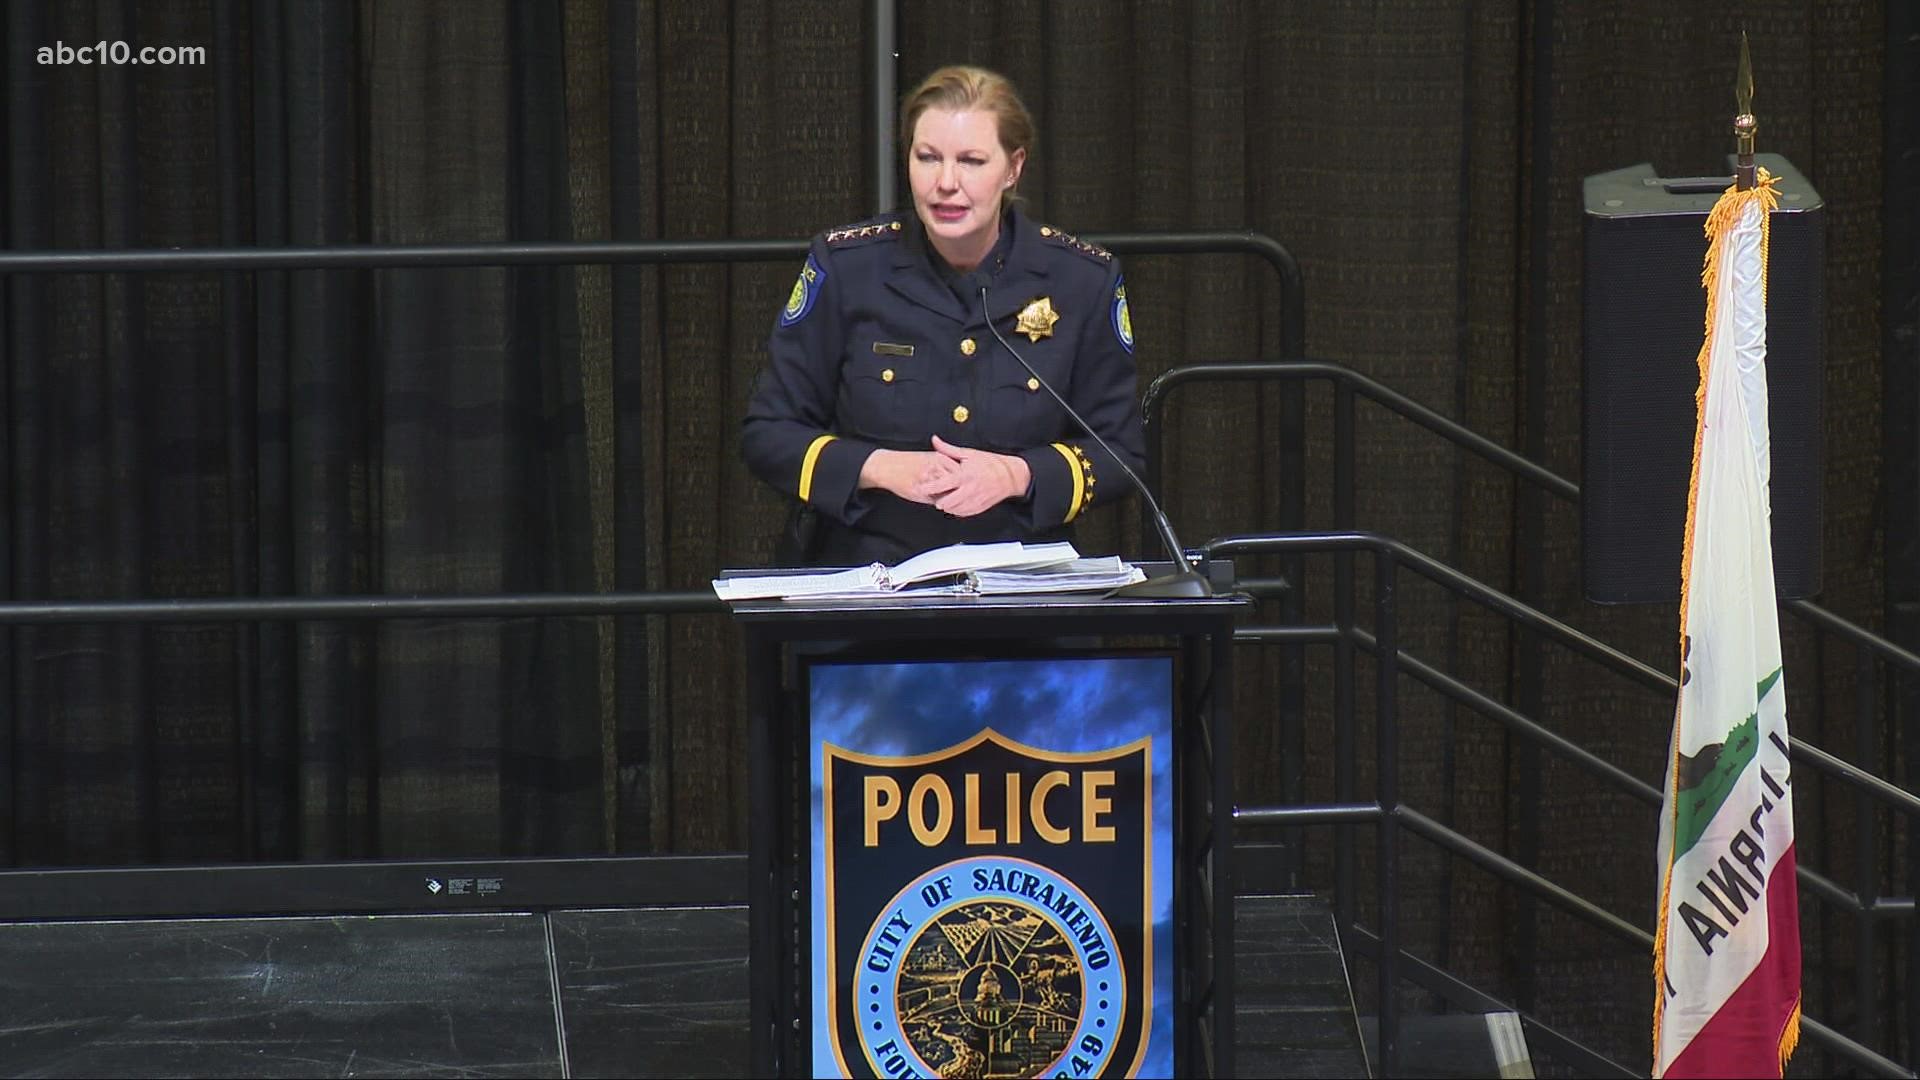 Kathy Lester is taking over the job from the city's first African American police chief Daniel Hahn who was in this role for four years, before retiring in December.